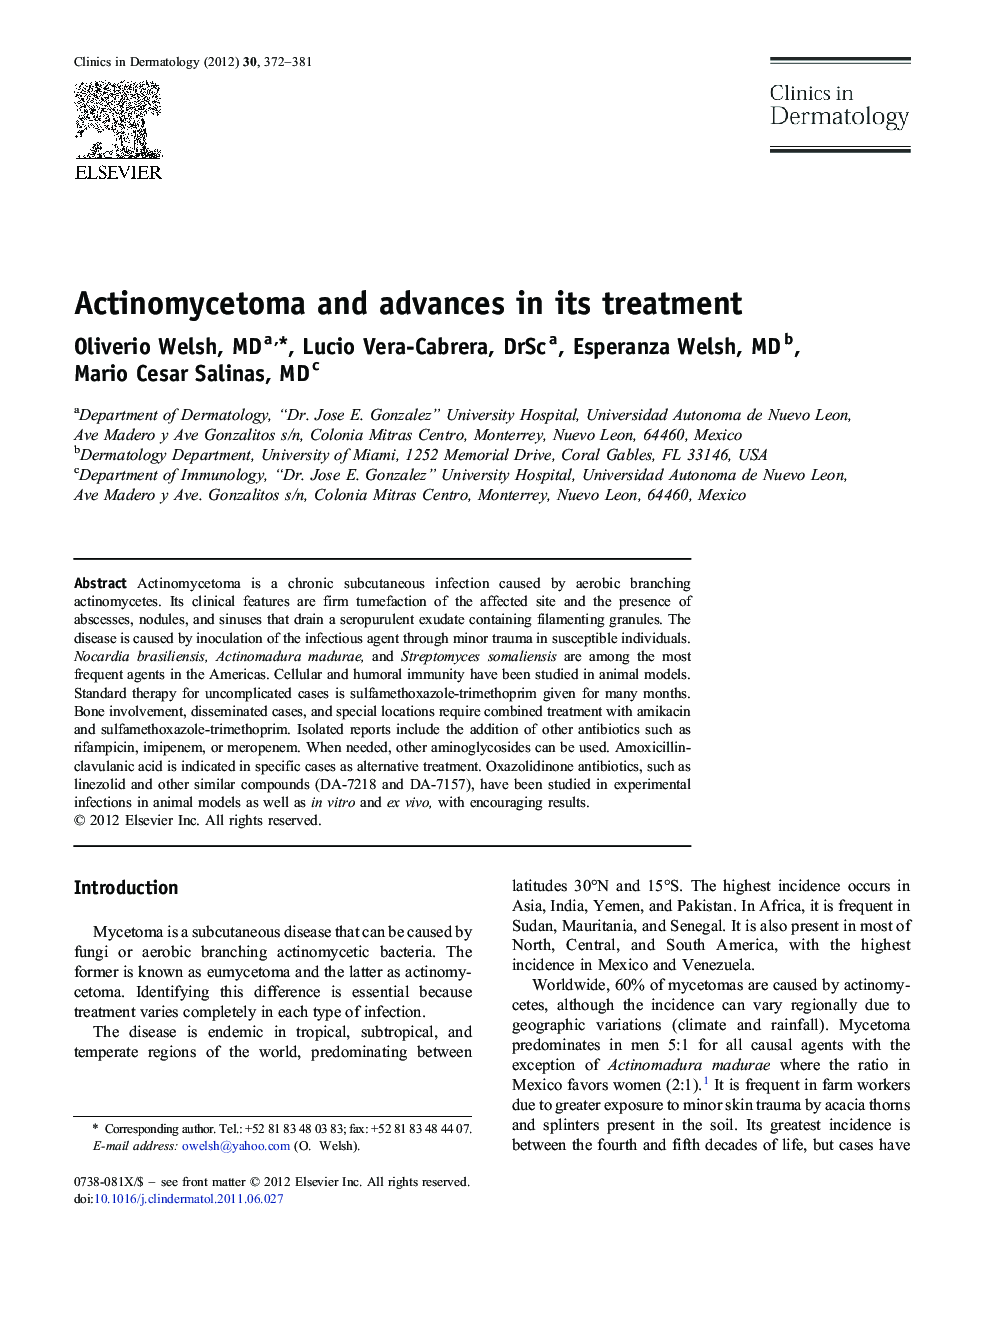 Actinomycetoma and advances in its treatment